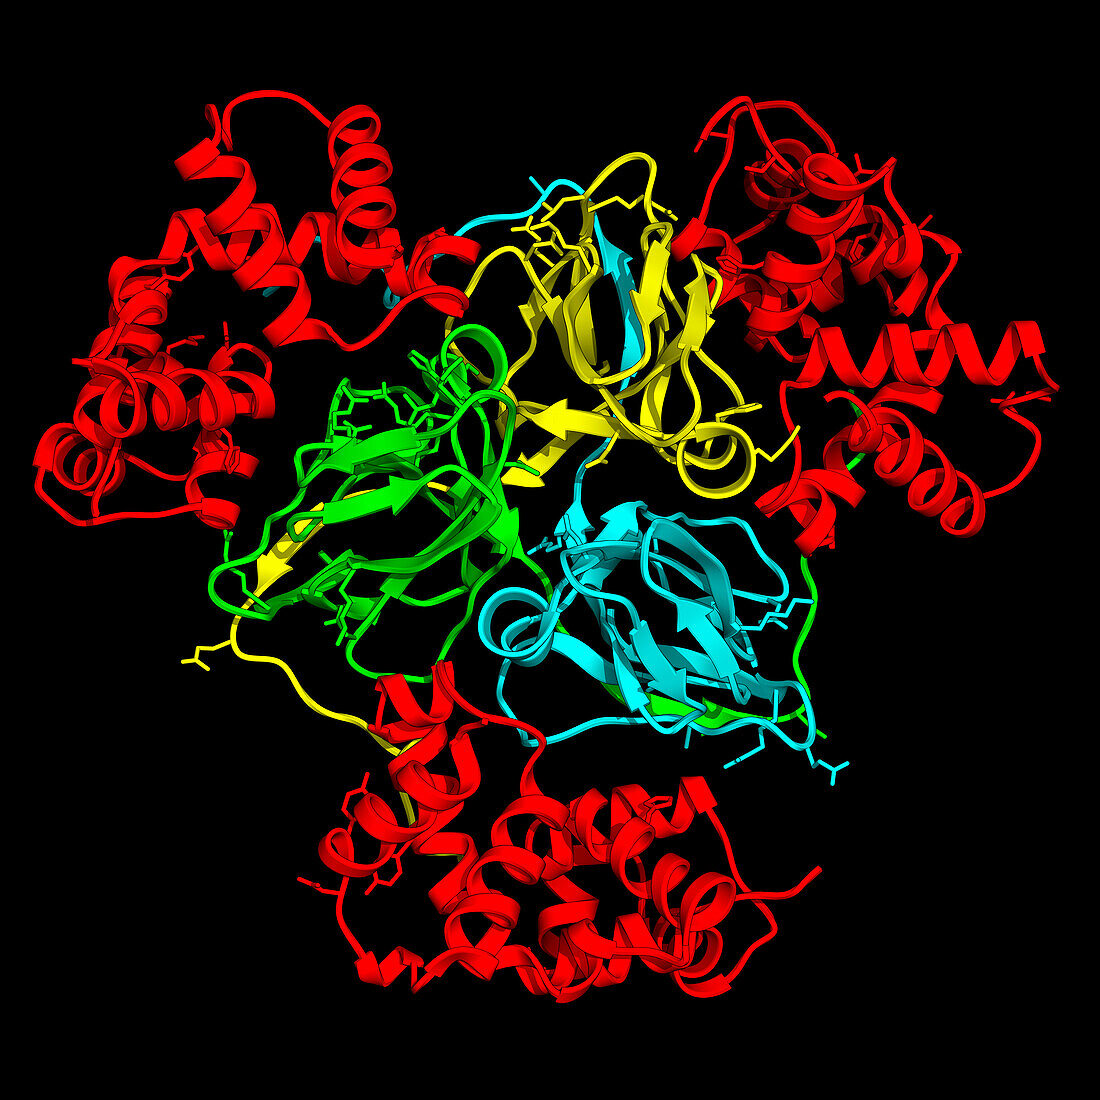 Human dUTPase complexed with Orf20, illustration